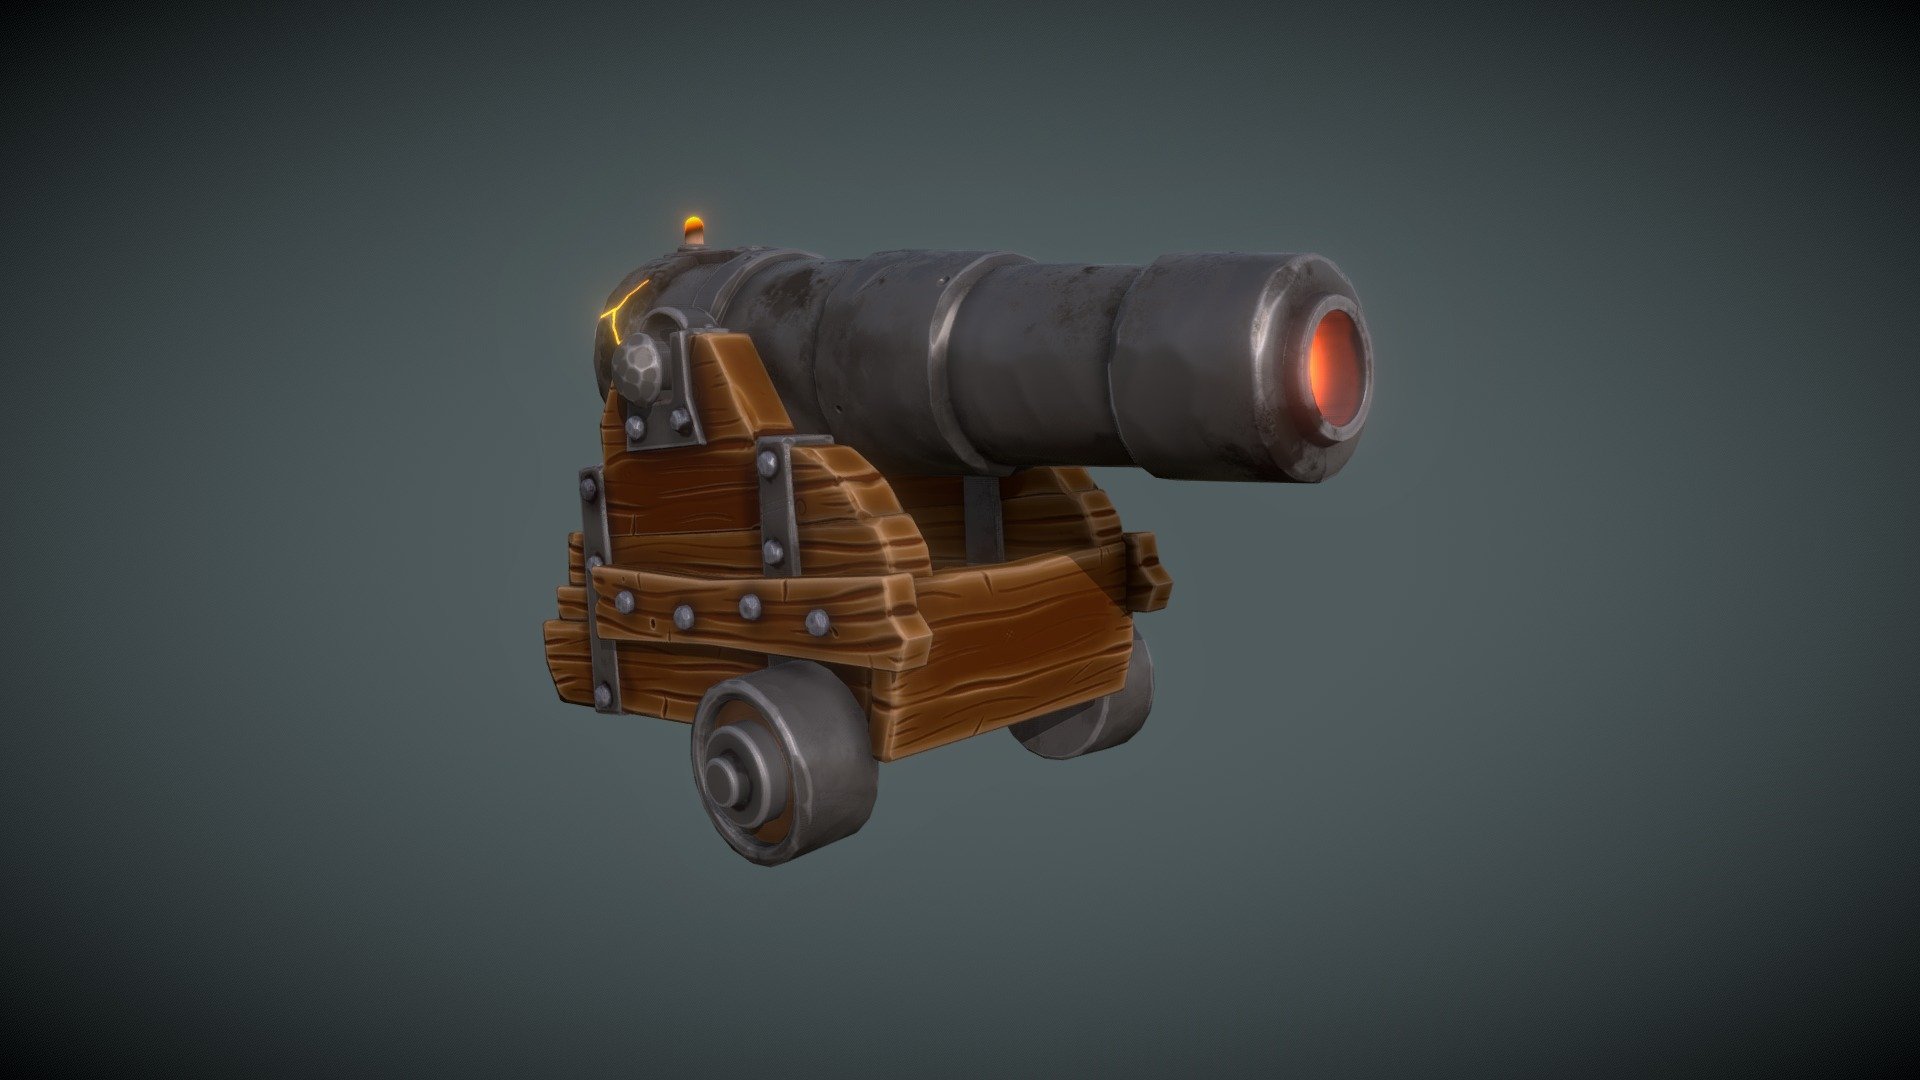 Stylized cannon Made for a bit of fun, Based on Sea of Thieves cannon Concept.

Modeled in Maya
Textured in Substance Painter - Stylized Cannon - 3D model by Harry.Matthias 3d model